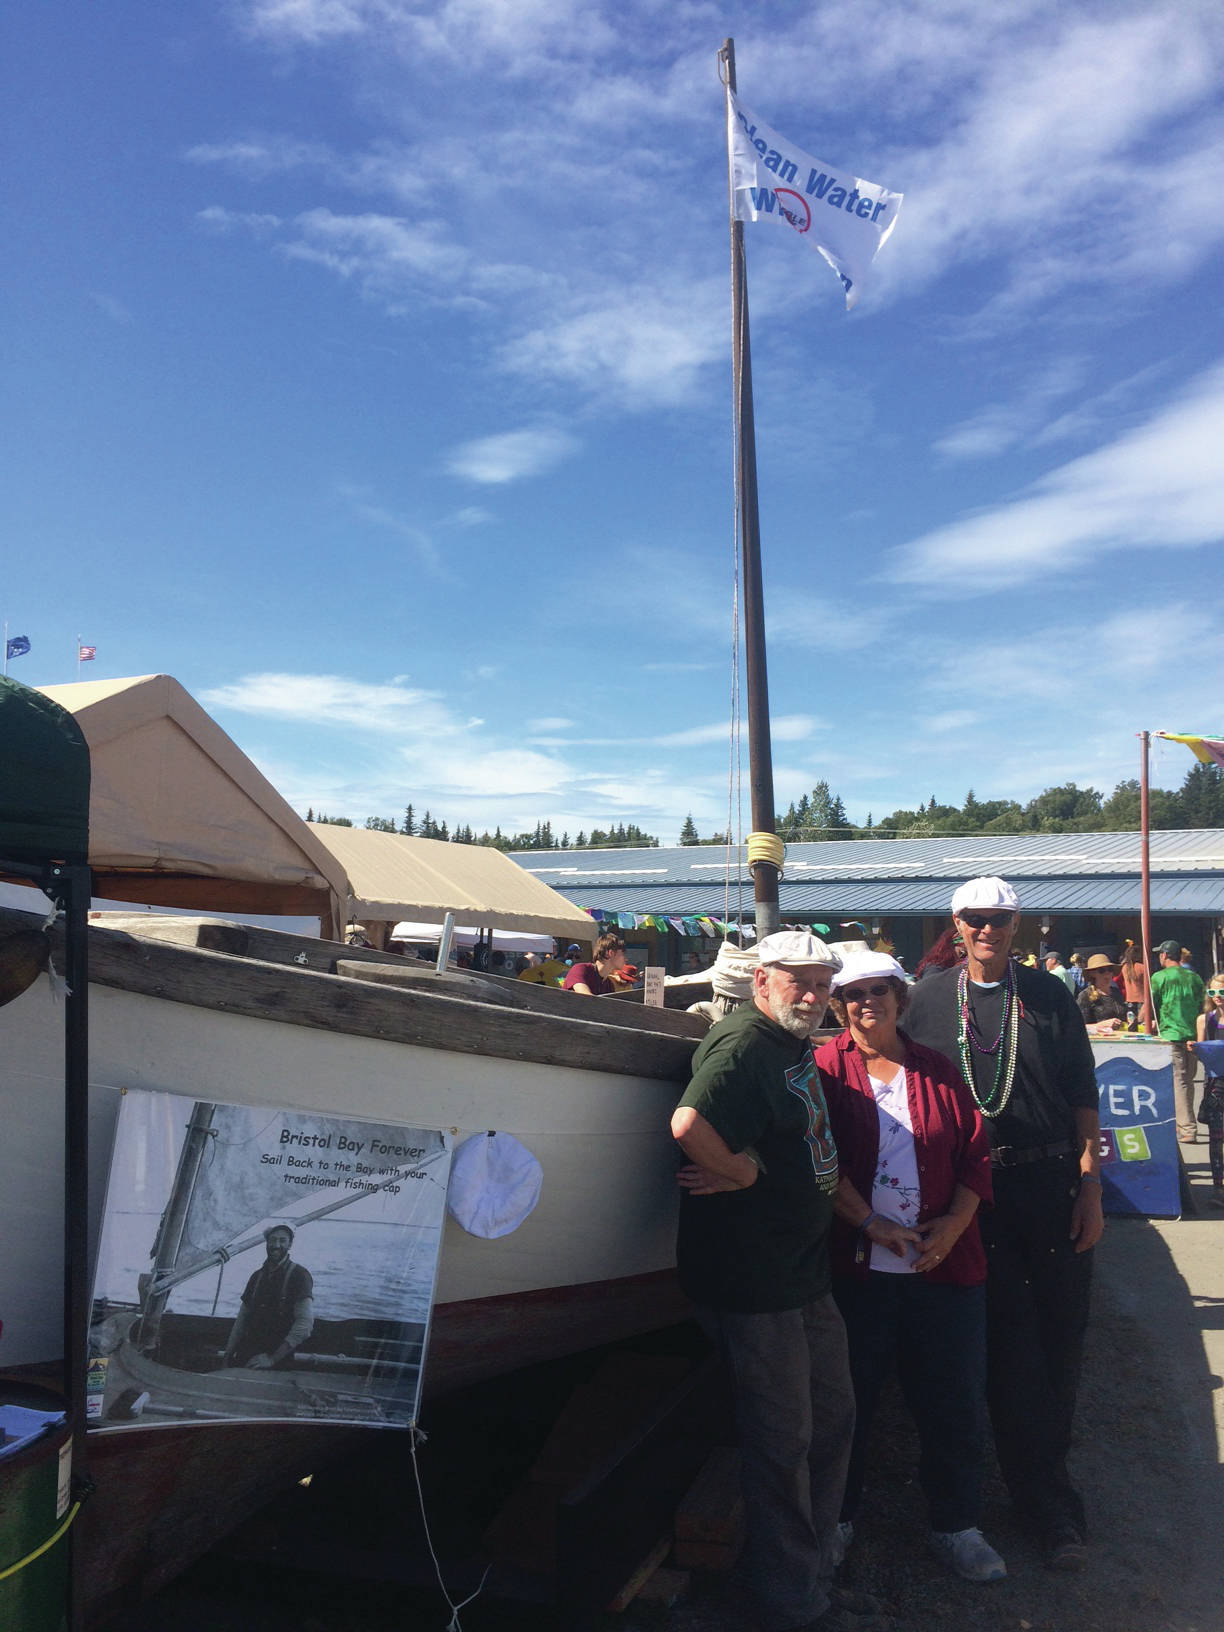 From left, Tim Troll, Kate Mitchell and Dave Seaman, stand in front of LML 144 on Sunday, Aug. 4, 2019, at Salmonfest in Ninilchik, Alaska. They are organizing “Sailing Back to the Bay 2020,” which will take the one-time fishing vessel from Homer to Bristol Bay. (Photo by McKibben Jackinsky)